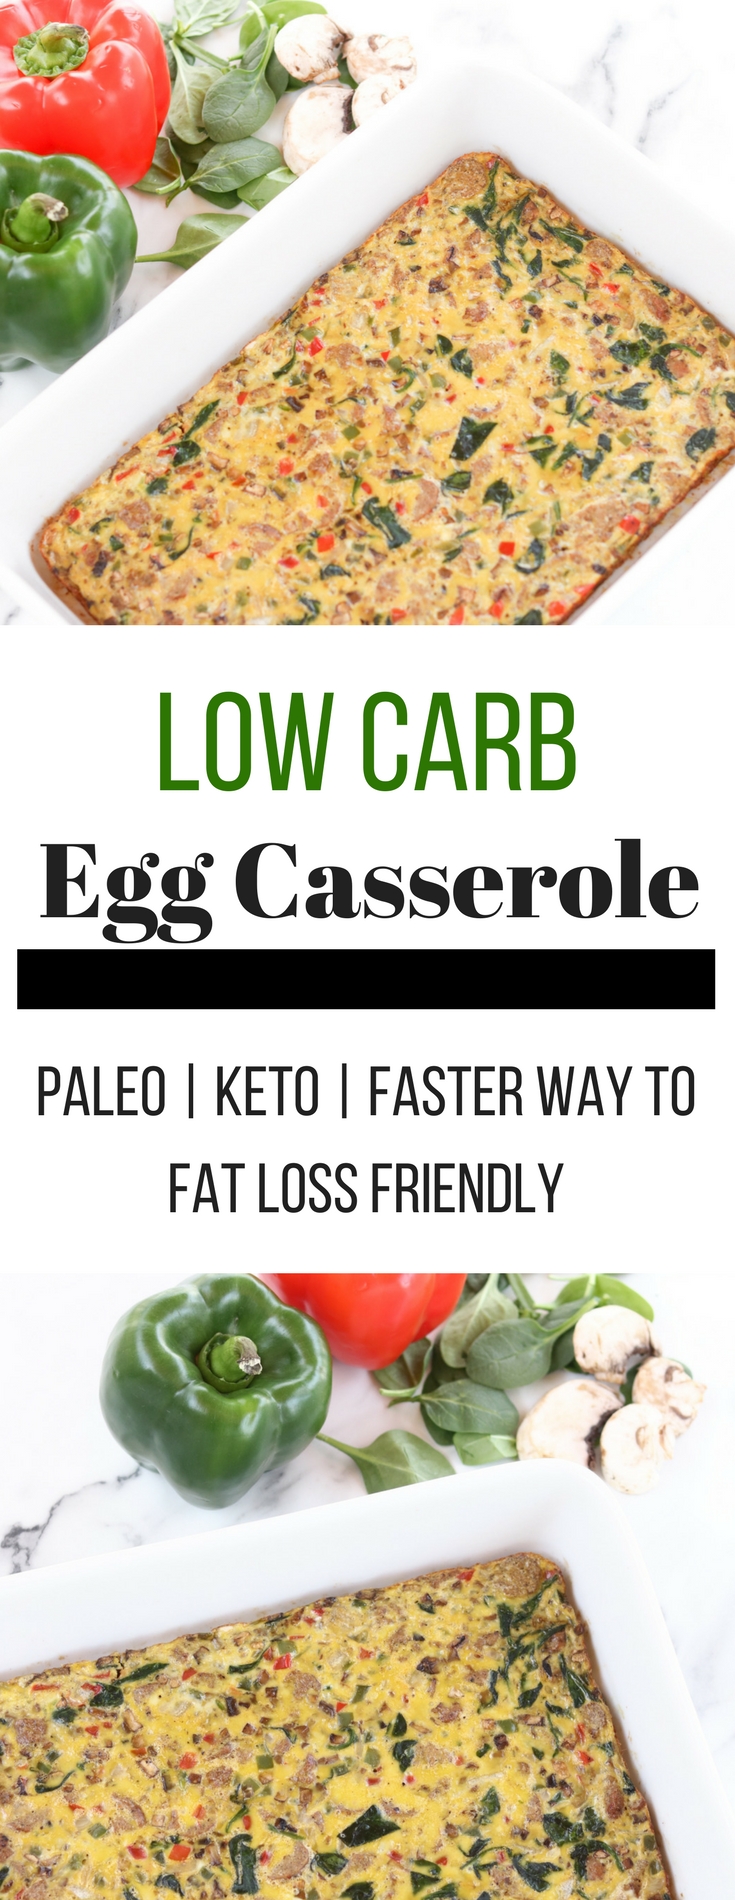 Low Carb Egg Casserole - Pale, Keto & Faster Way To Fast Loss Friendly.